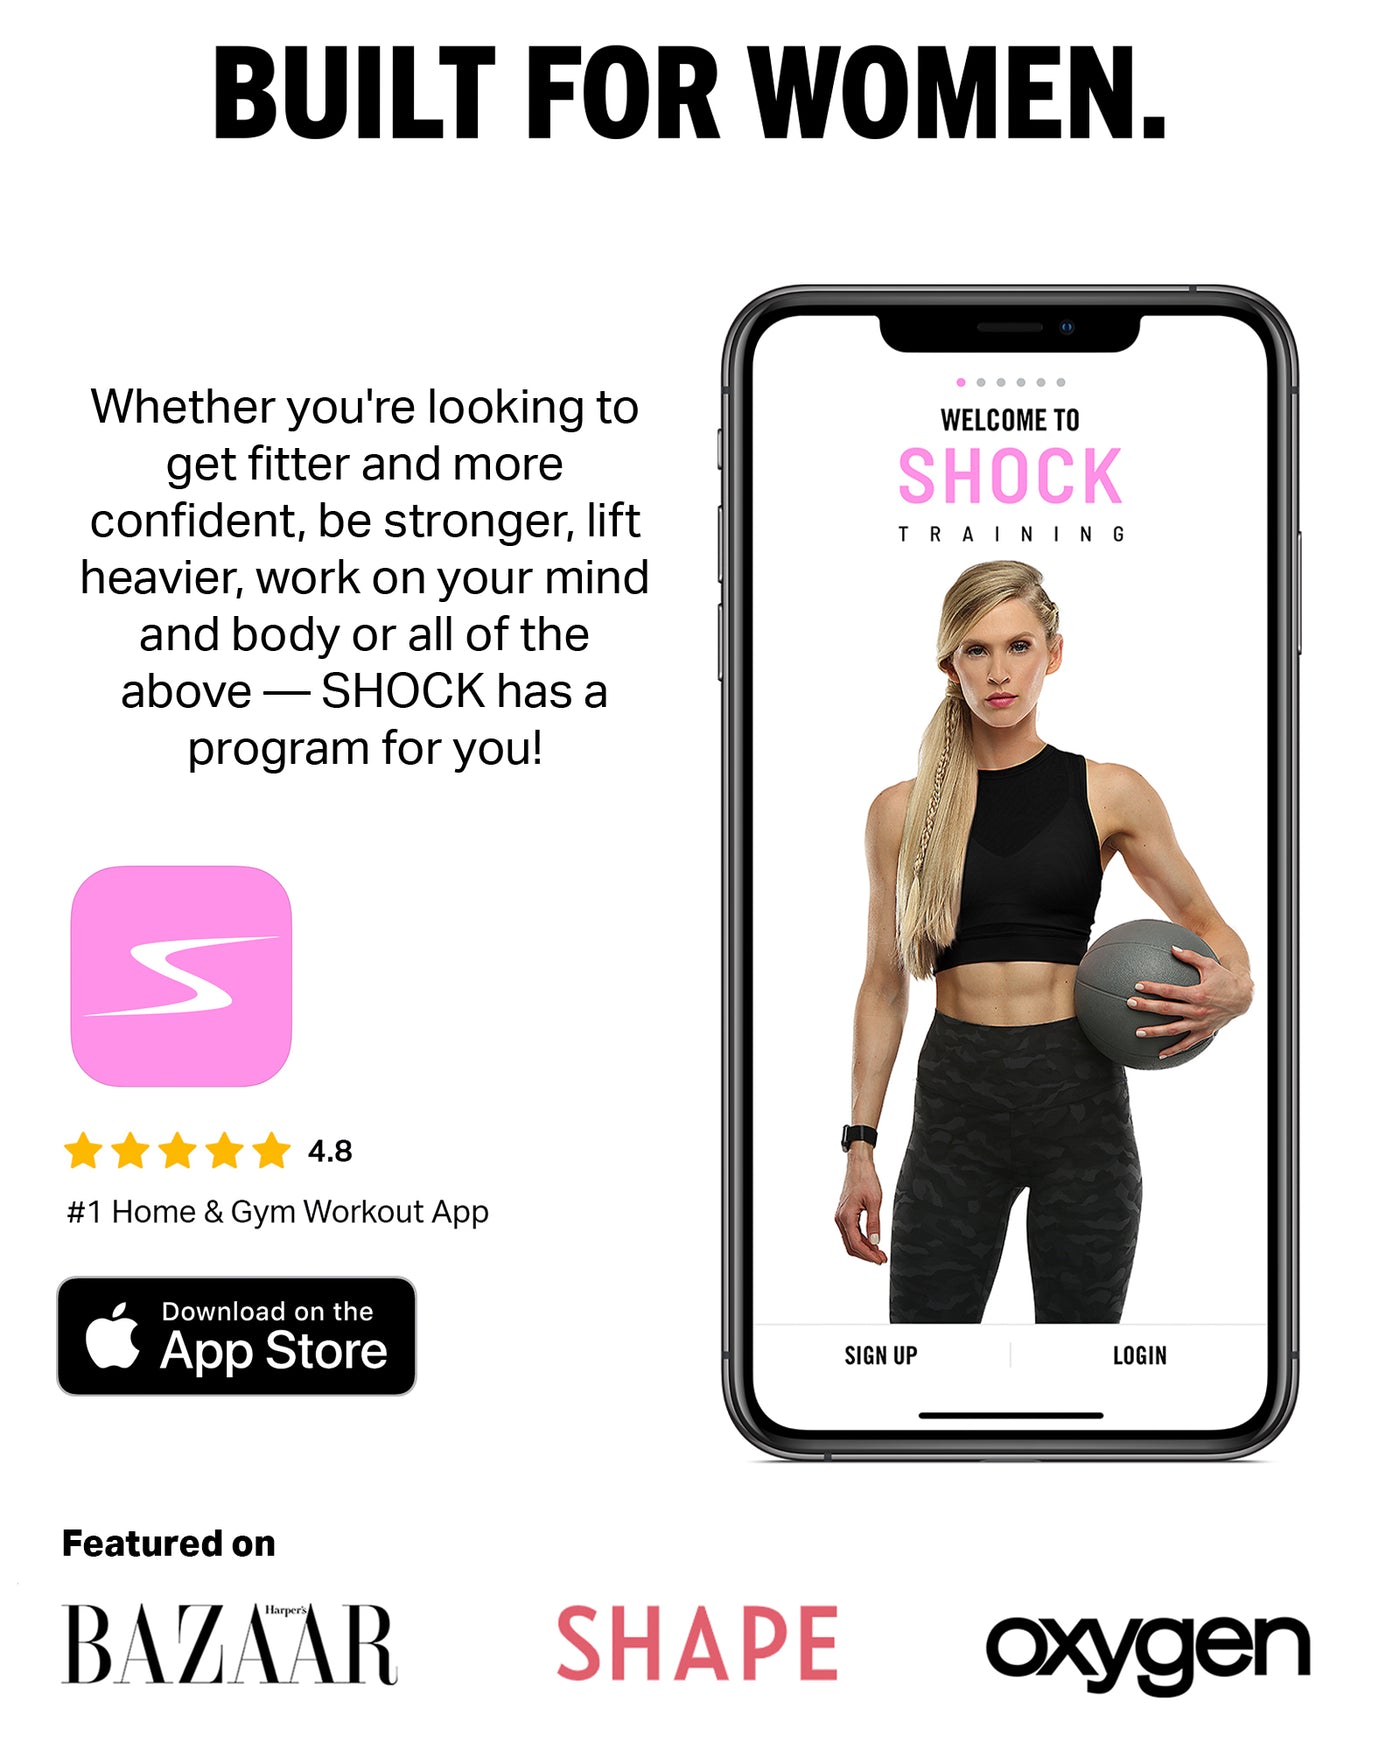 SHOCK has been featured in OXYGEN Magazine and SHAPE.